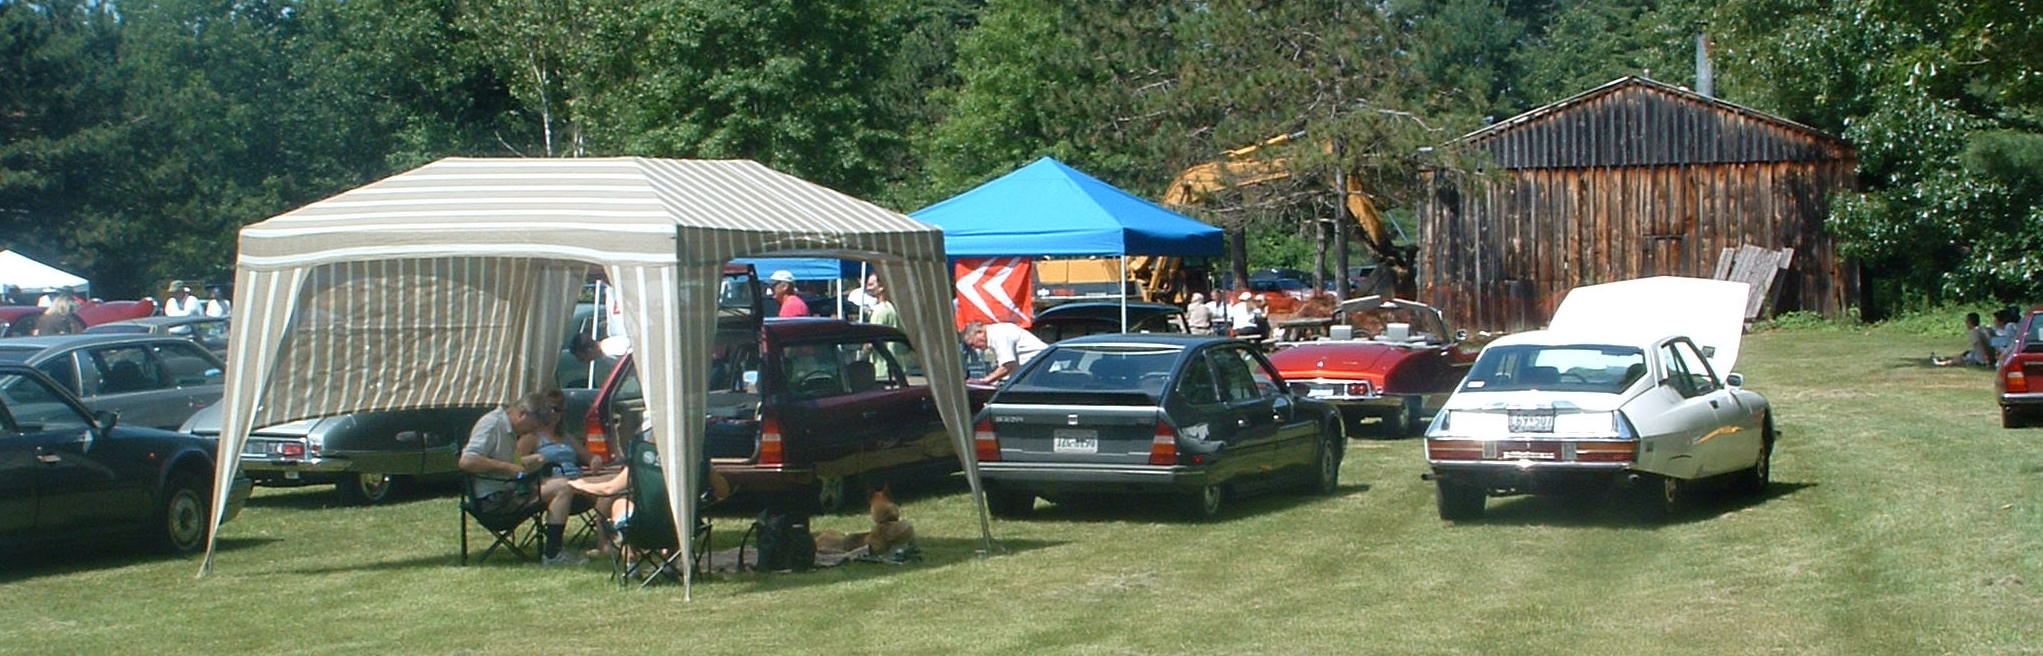 Three of our Citrons
		at Rendezvous 2007, held in Saratoga Springs, New York.  From left, the maroon CX is the 1987 Safari, next is the 
		1987 CX 25 GTI, and that's Dad's white 1973 SM.